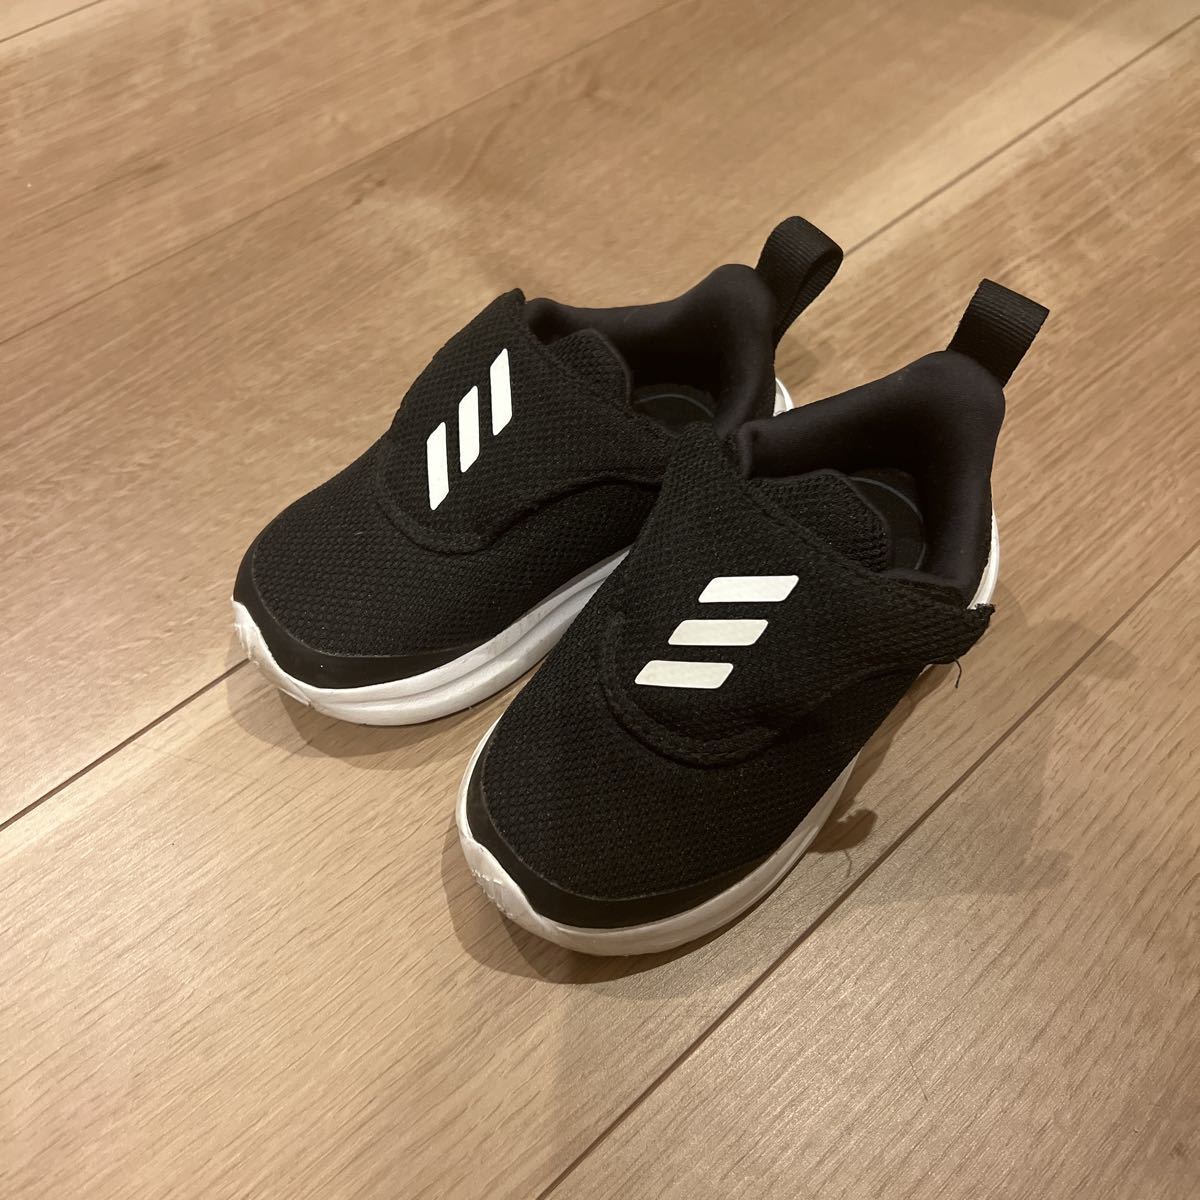  once only have on Adidas Kids sneakers child 13 centimeter 13.0 baby adidas man girl 